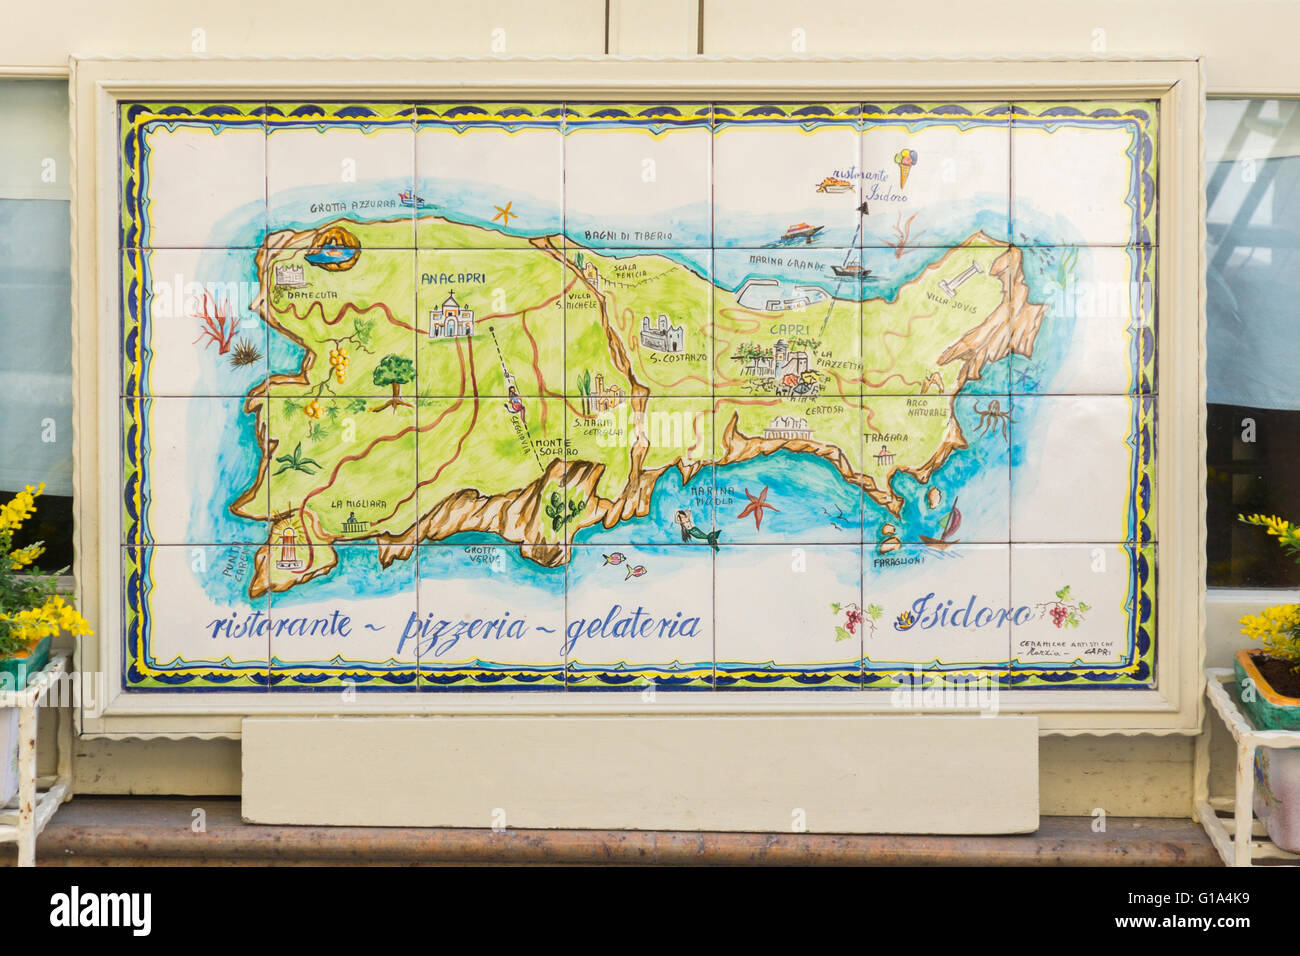 Colourful hand painted ceramic tiles depicting a map of Capri island as an advertisement outside the restaurant Isidoro on the Via Roma. Capri, Italy Stock Photo